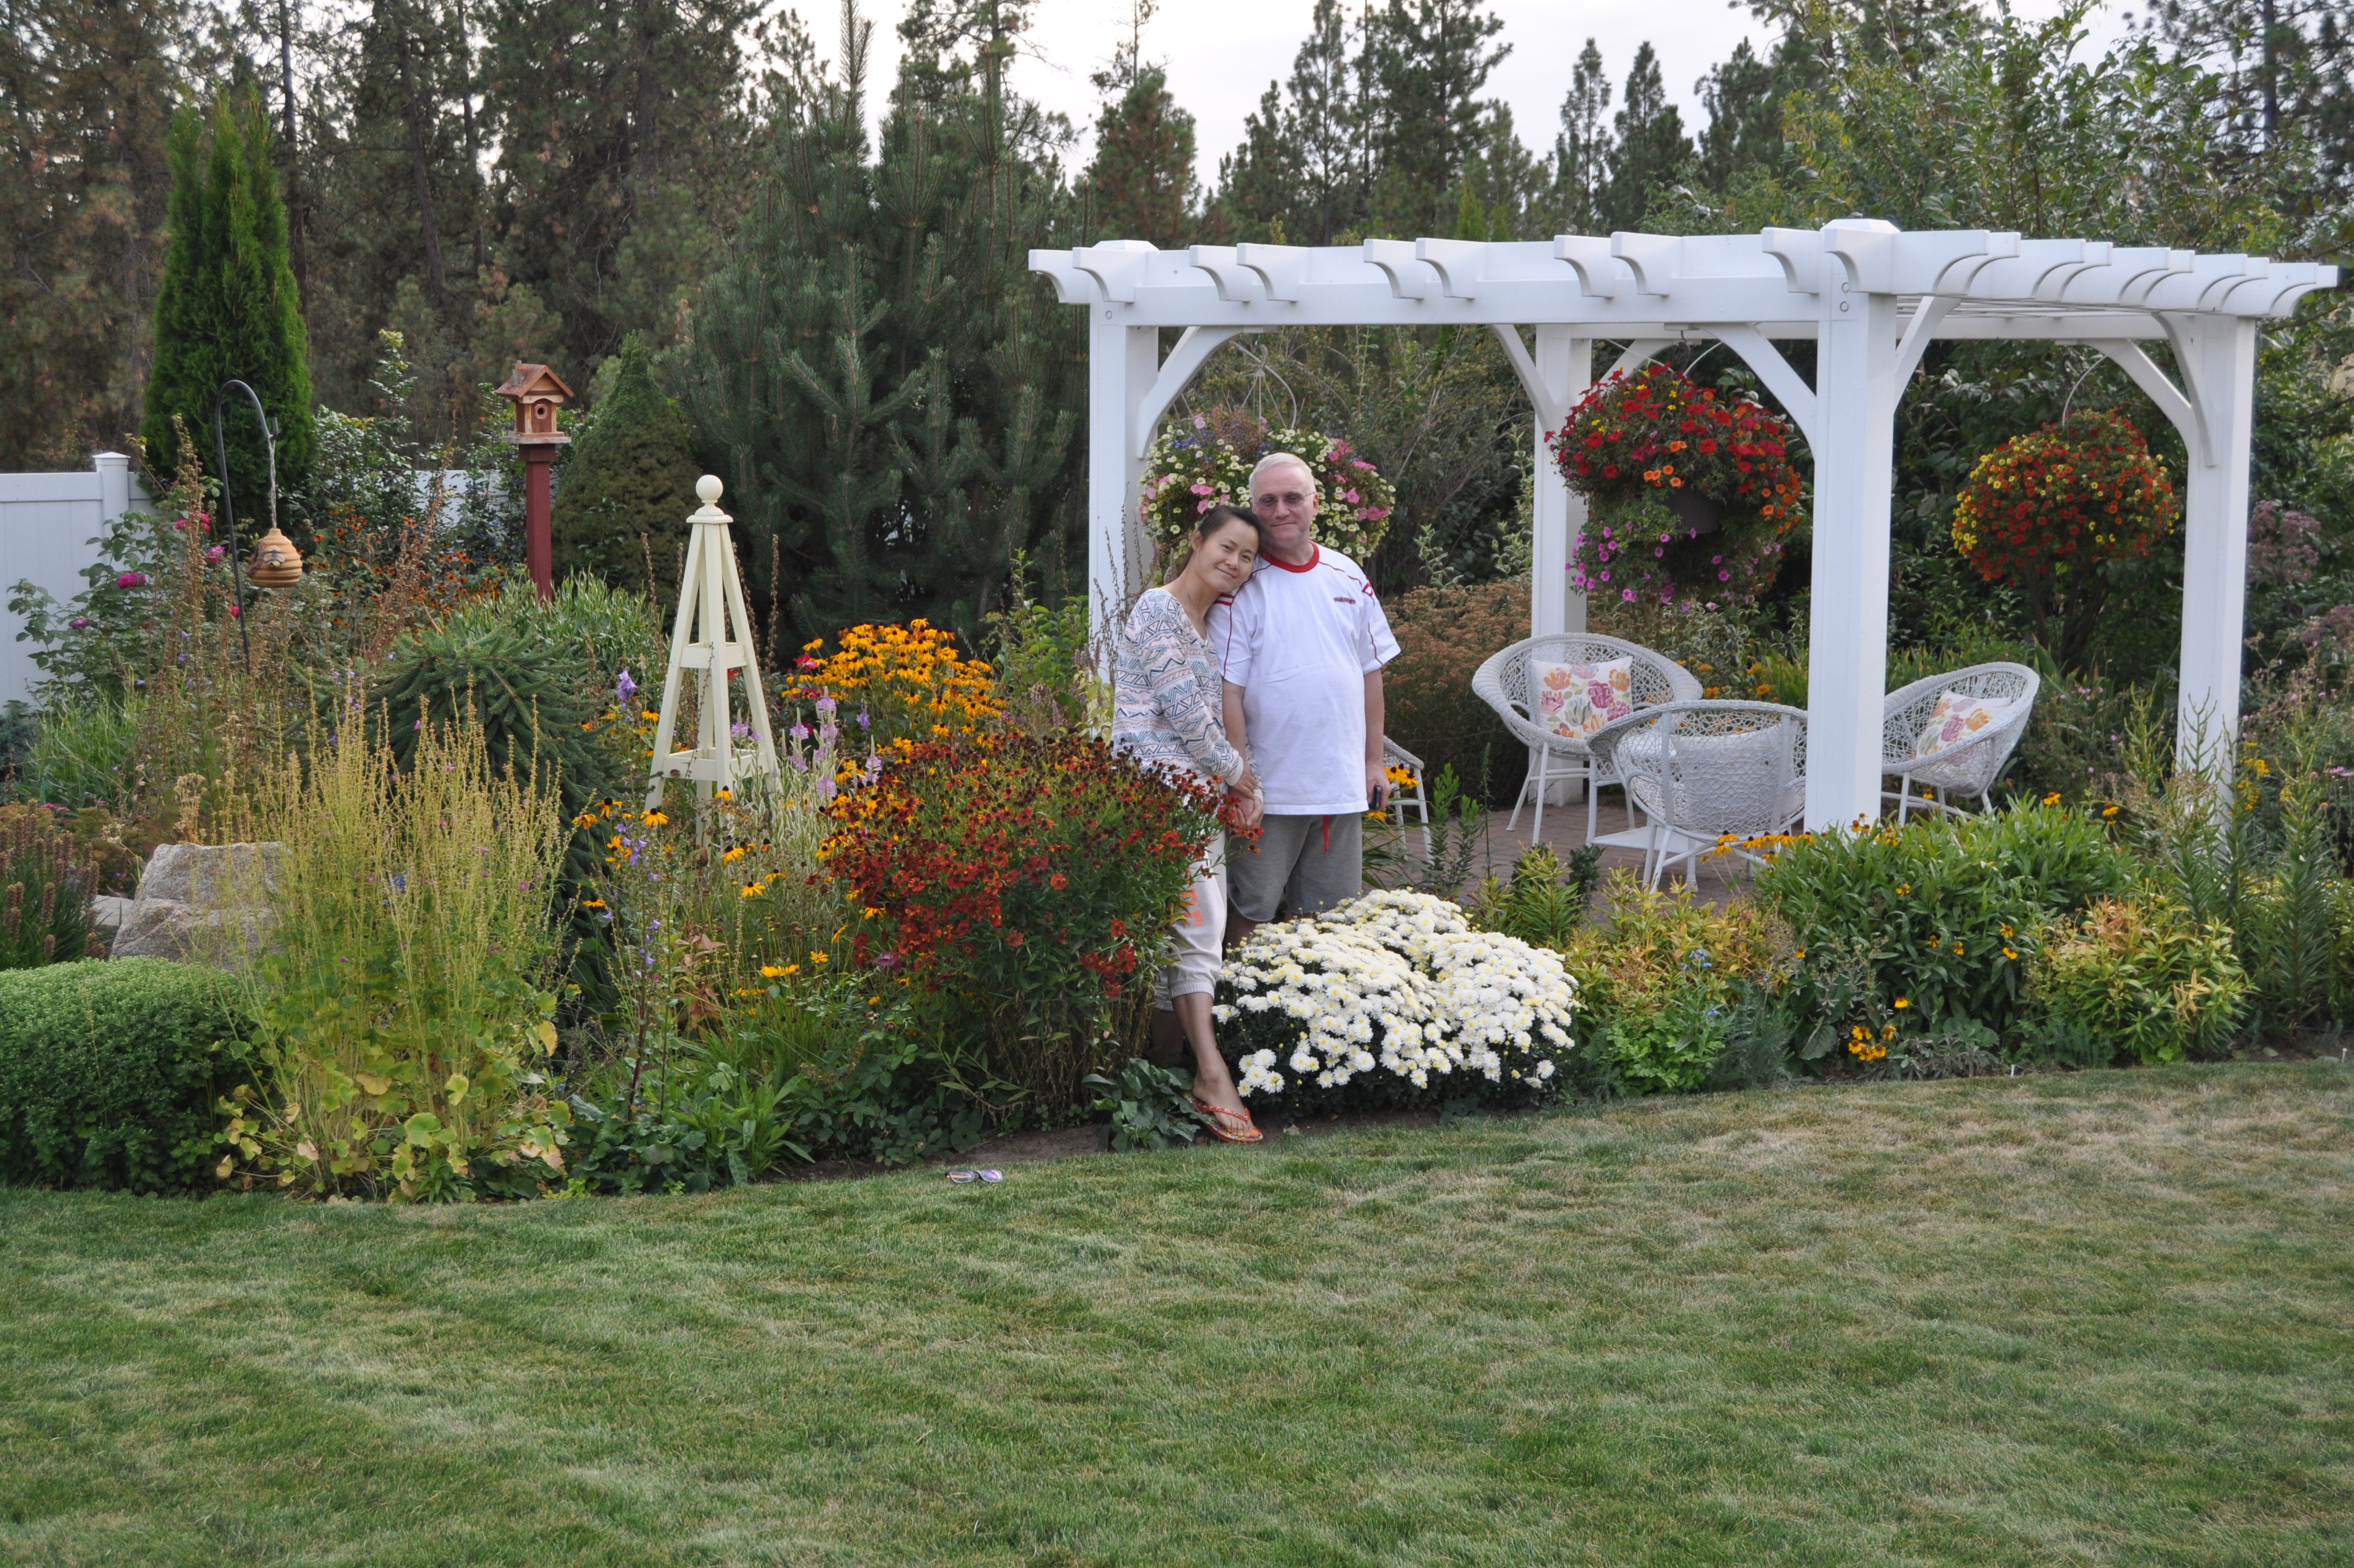 Couple S Garden Featured In 2016 Spokane In Bloom Tour The